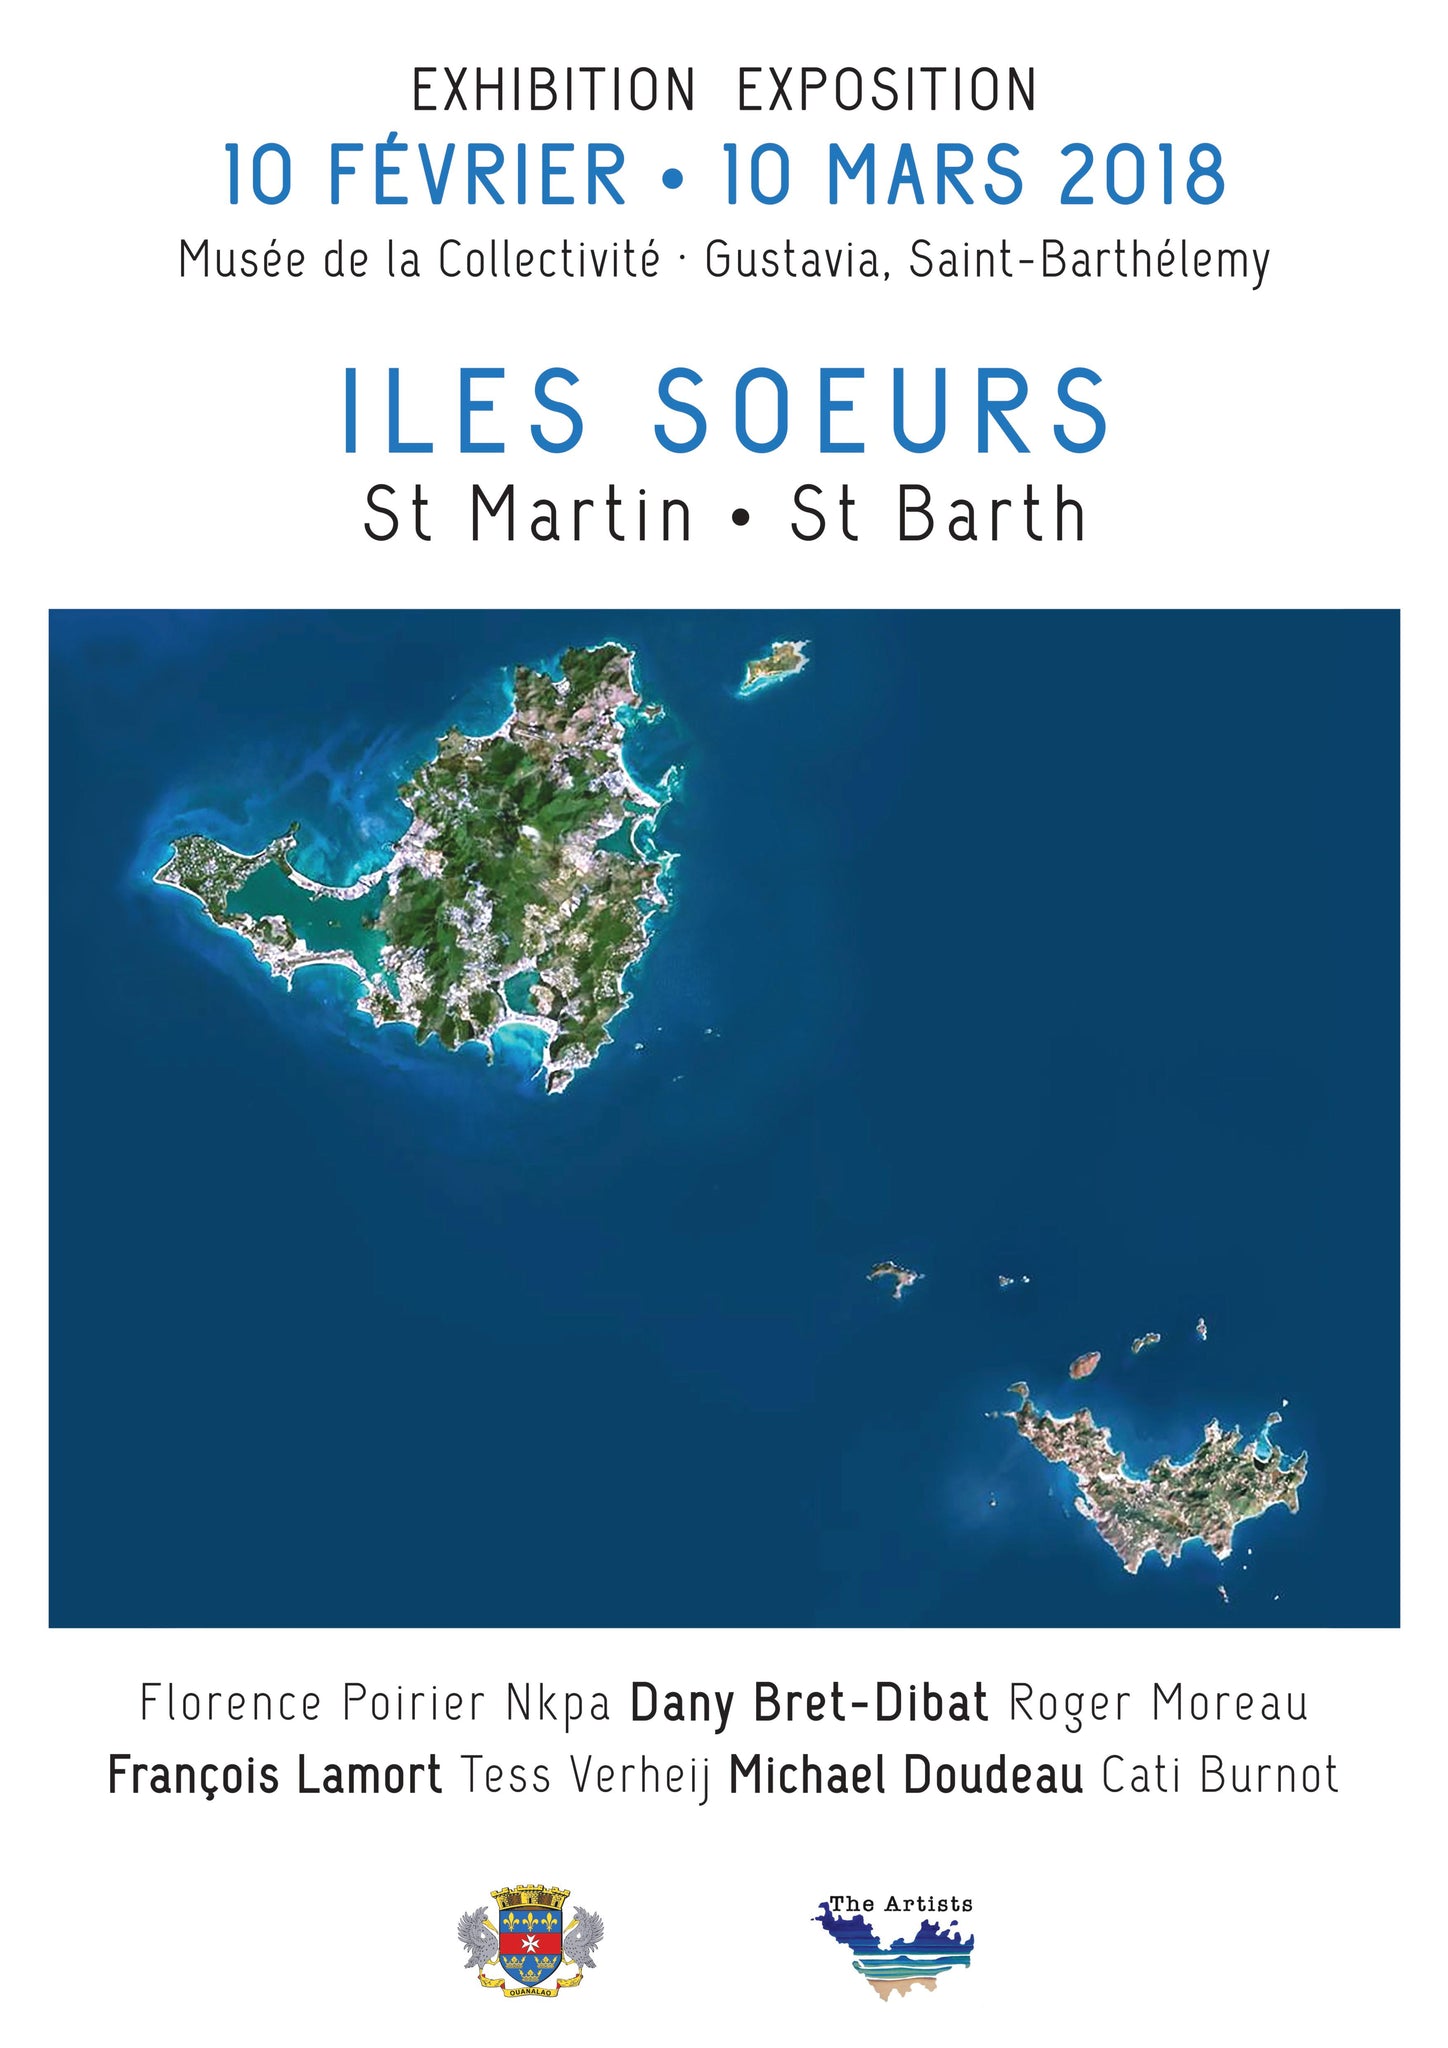 "Iles Soeurs" from 10 February to 10 March 2018 in Gustavia's Museum